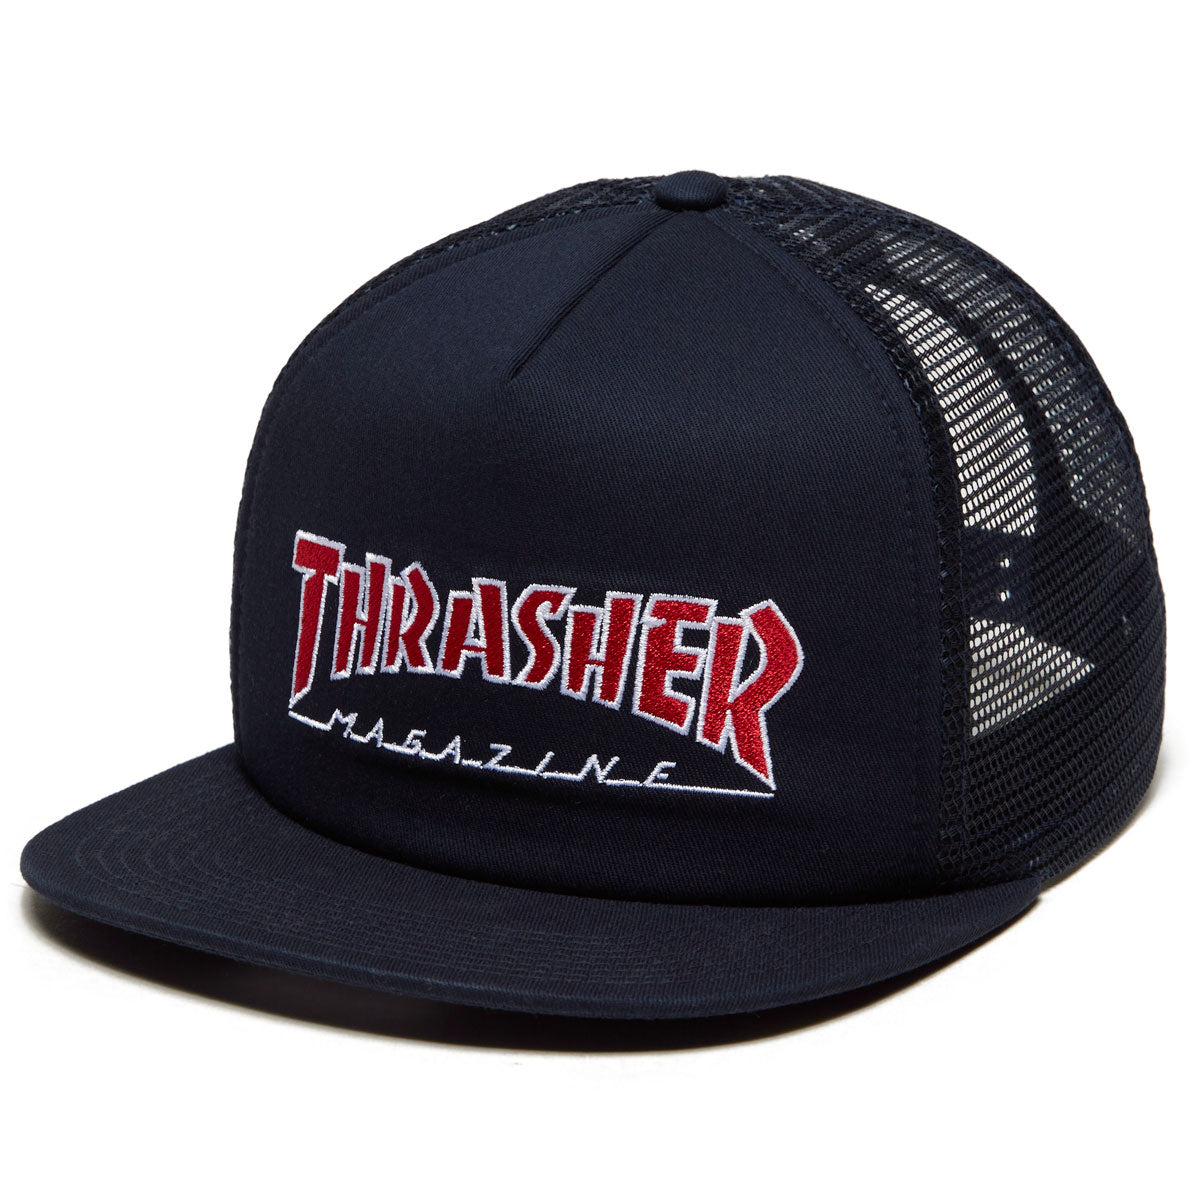 Thrasher Embroidered Outlined Mesh Hat - Navy image 1